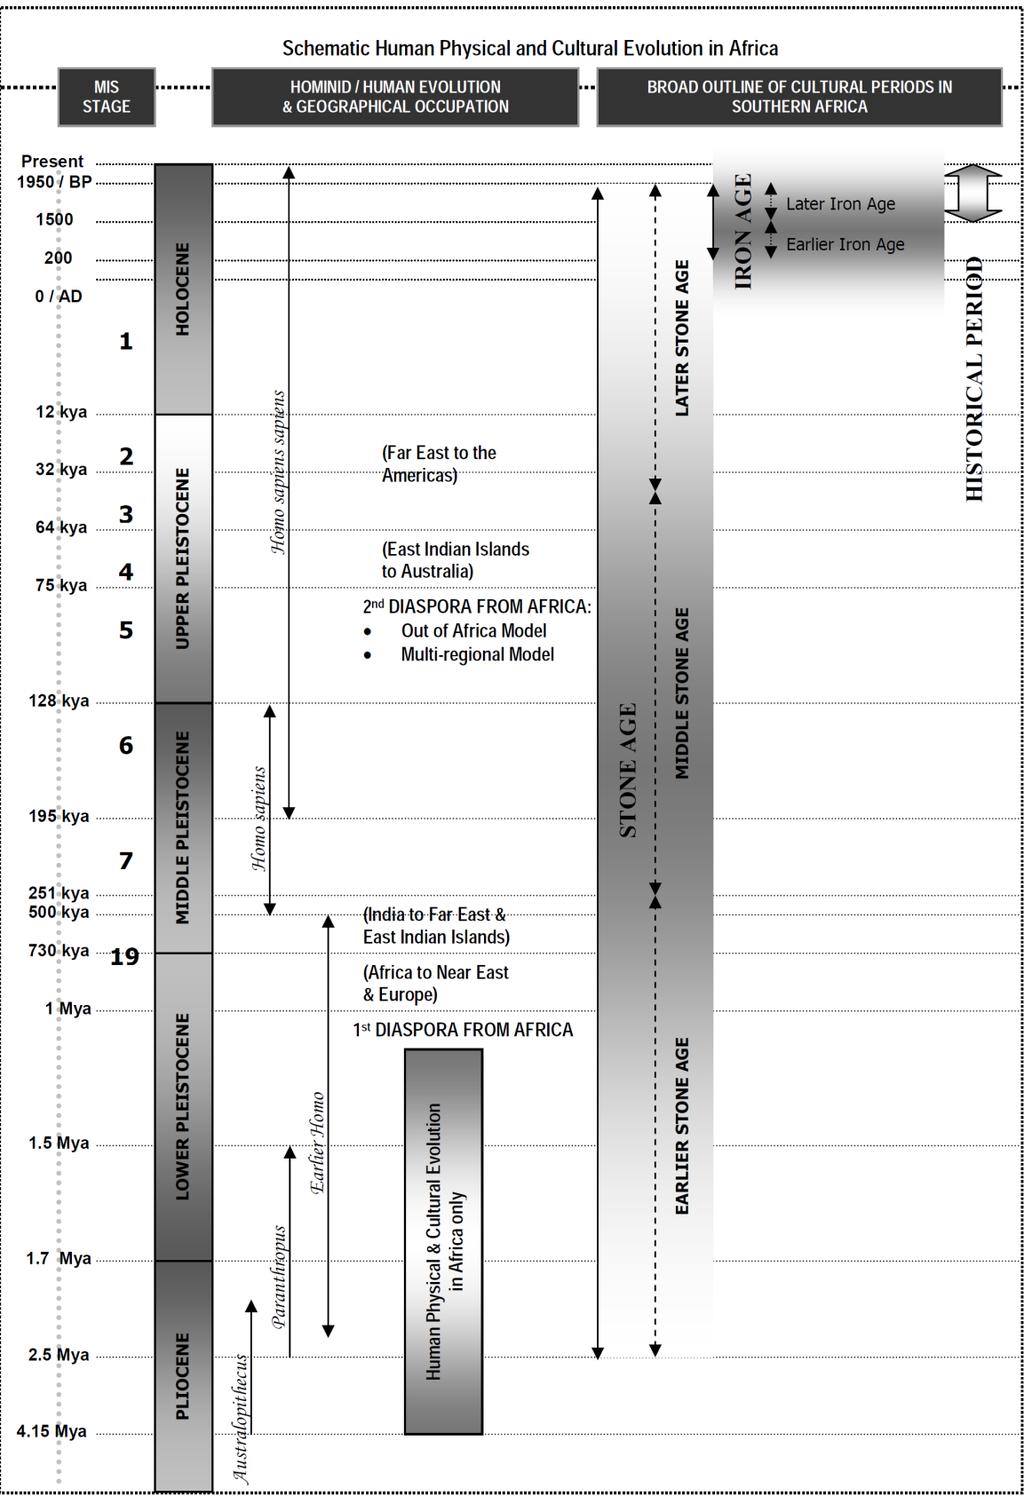 Figure 1: Human and Cultural Time line in Africa